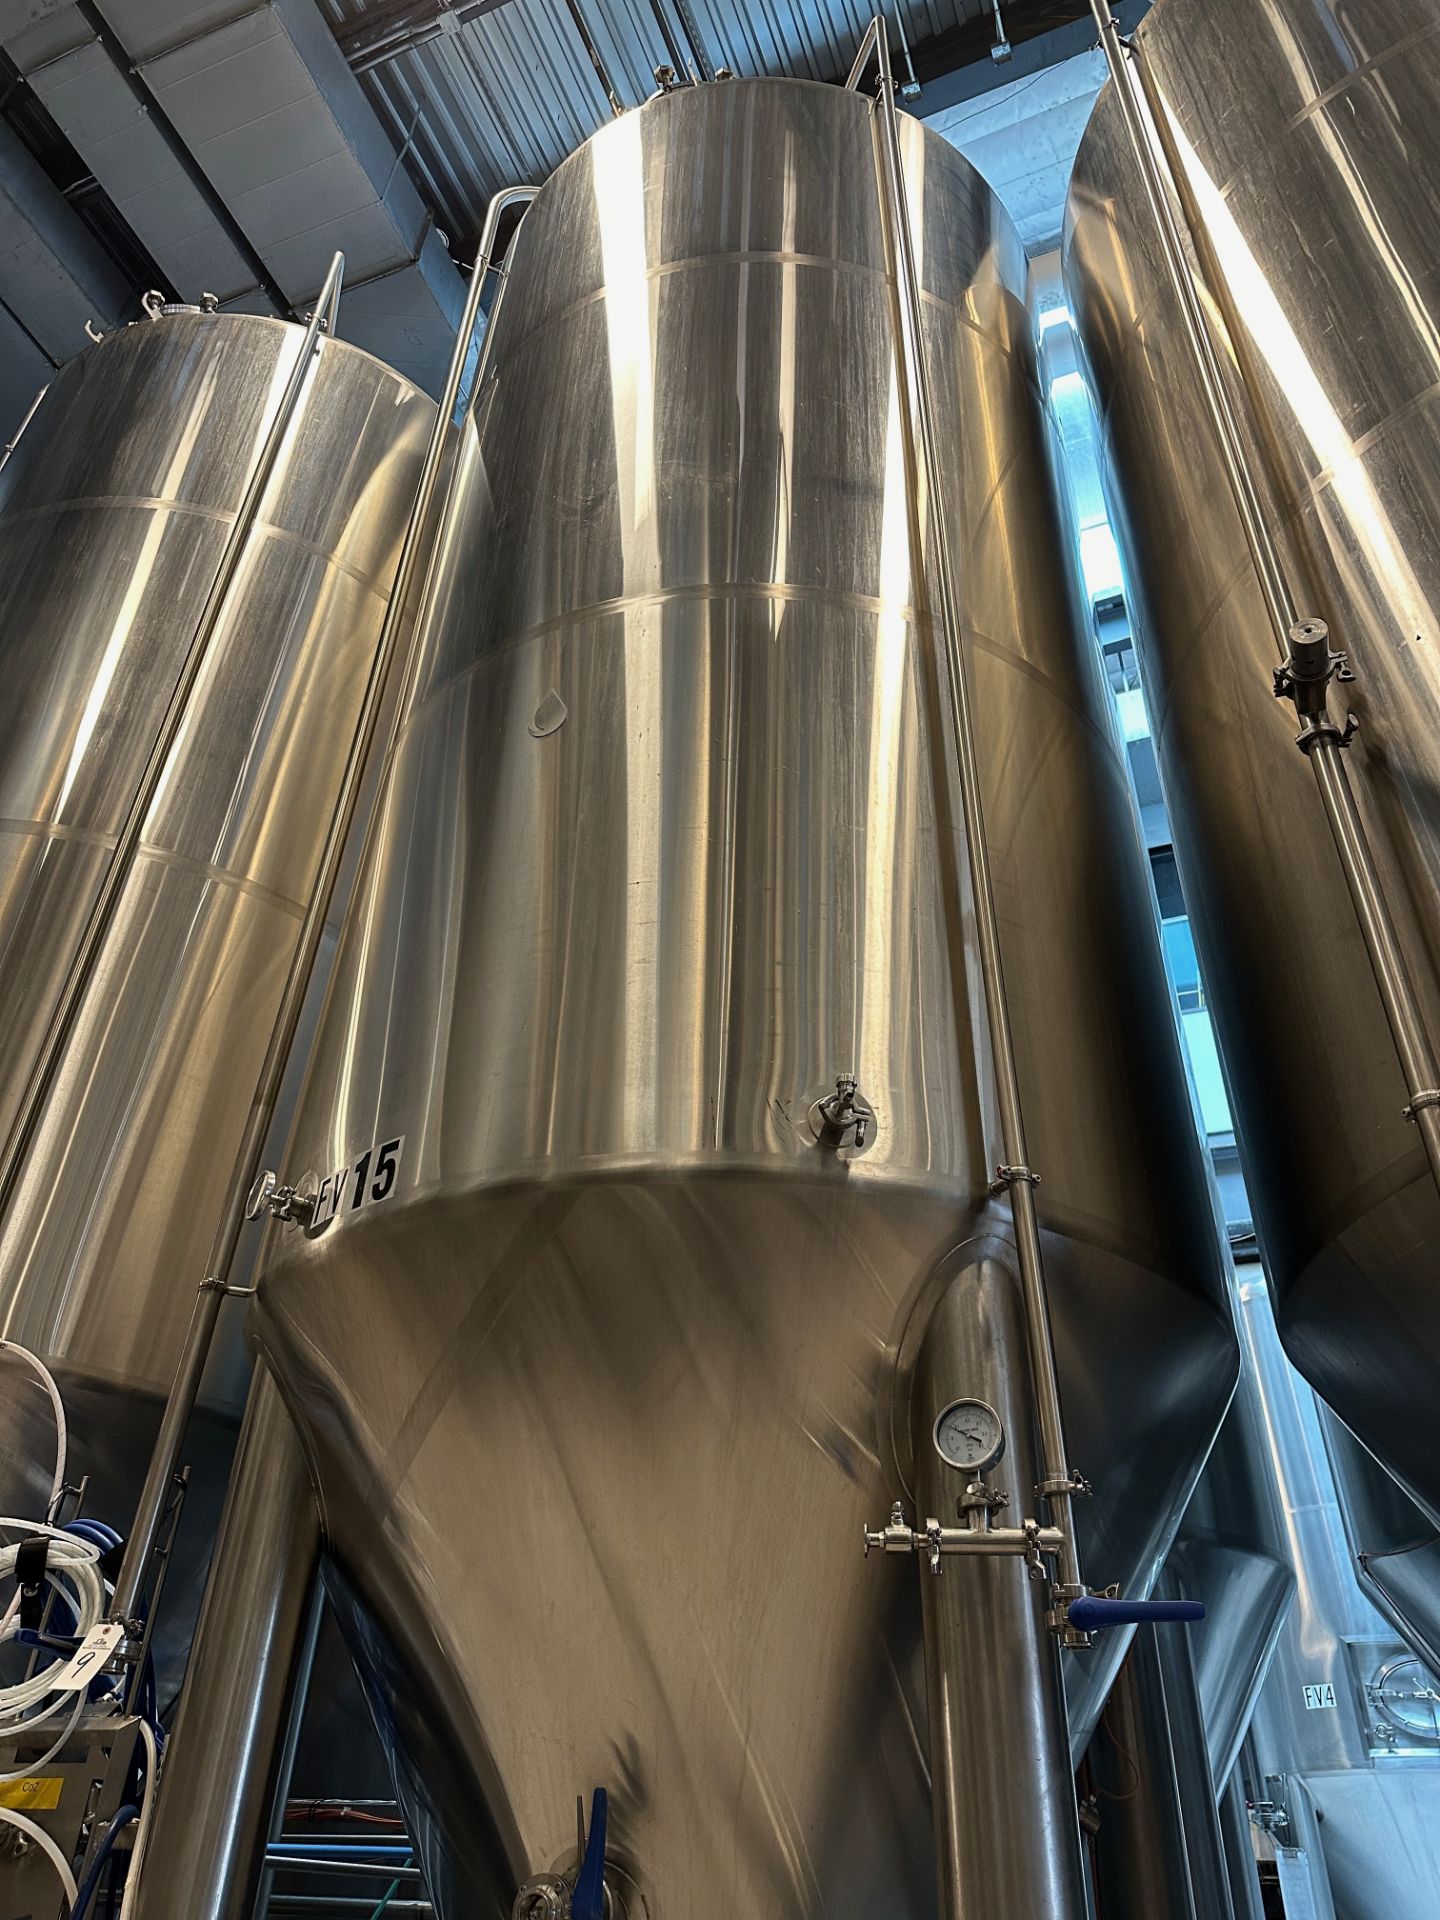 Complete 40 BBL Microbrewery - 40 BBL Deutsche 4-Vessel Brewhouse, Tanks, Can Line - See Description - Image 33 of 335